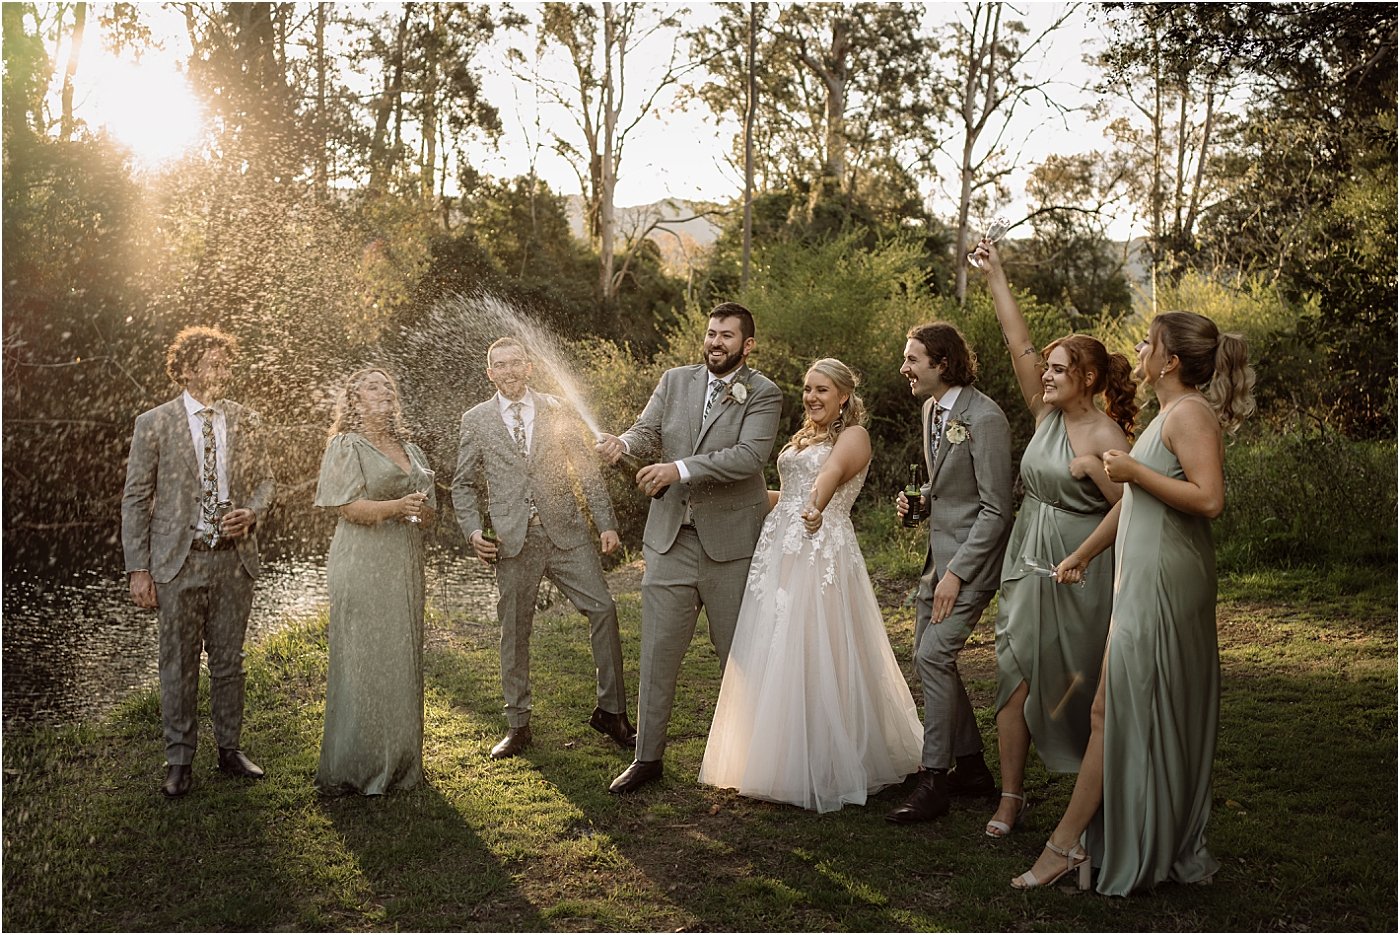 Bridal party popping and spraying champagne